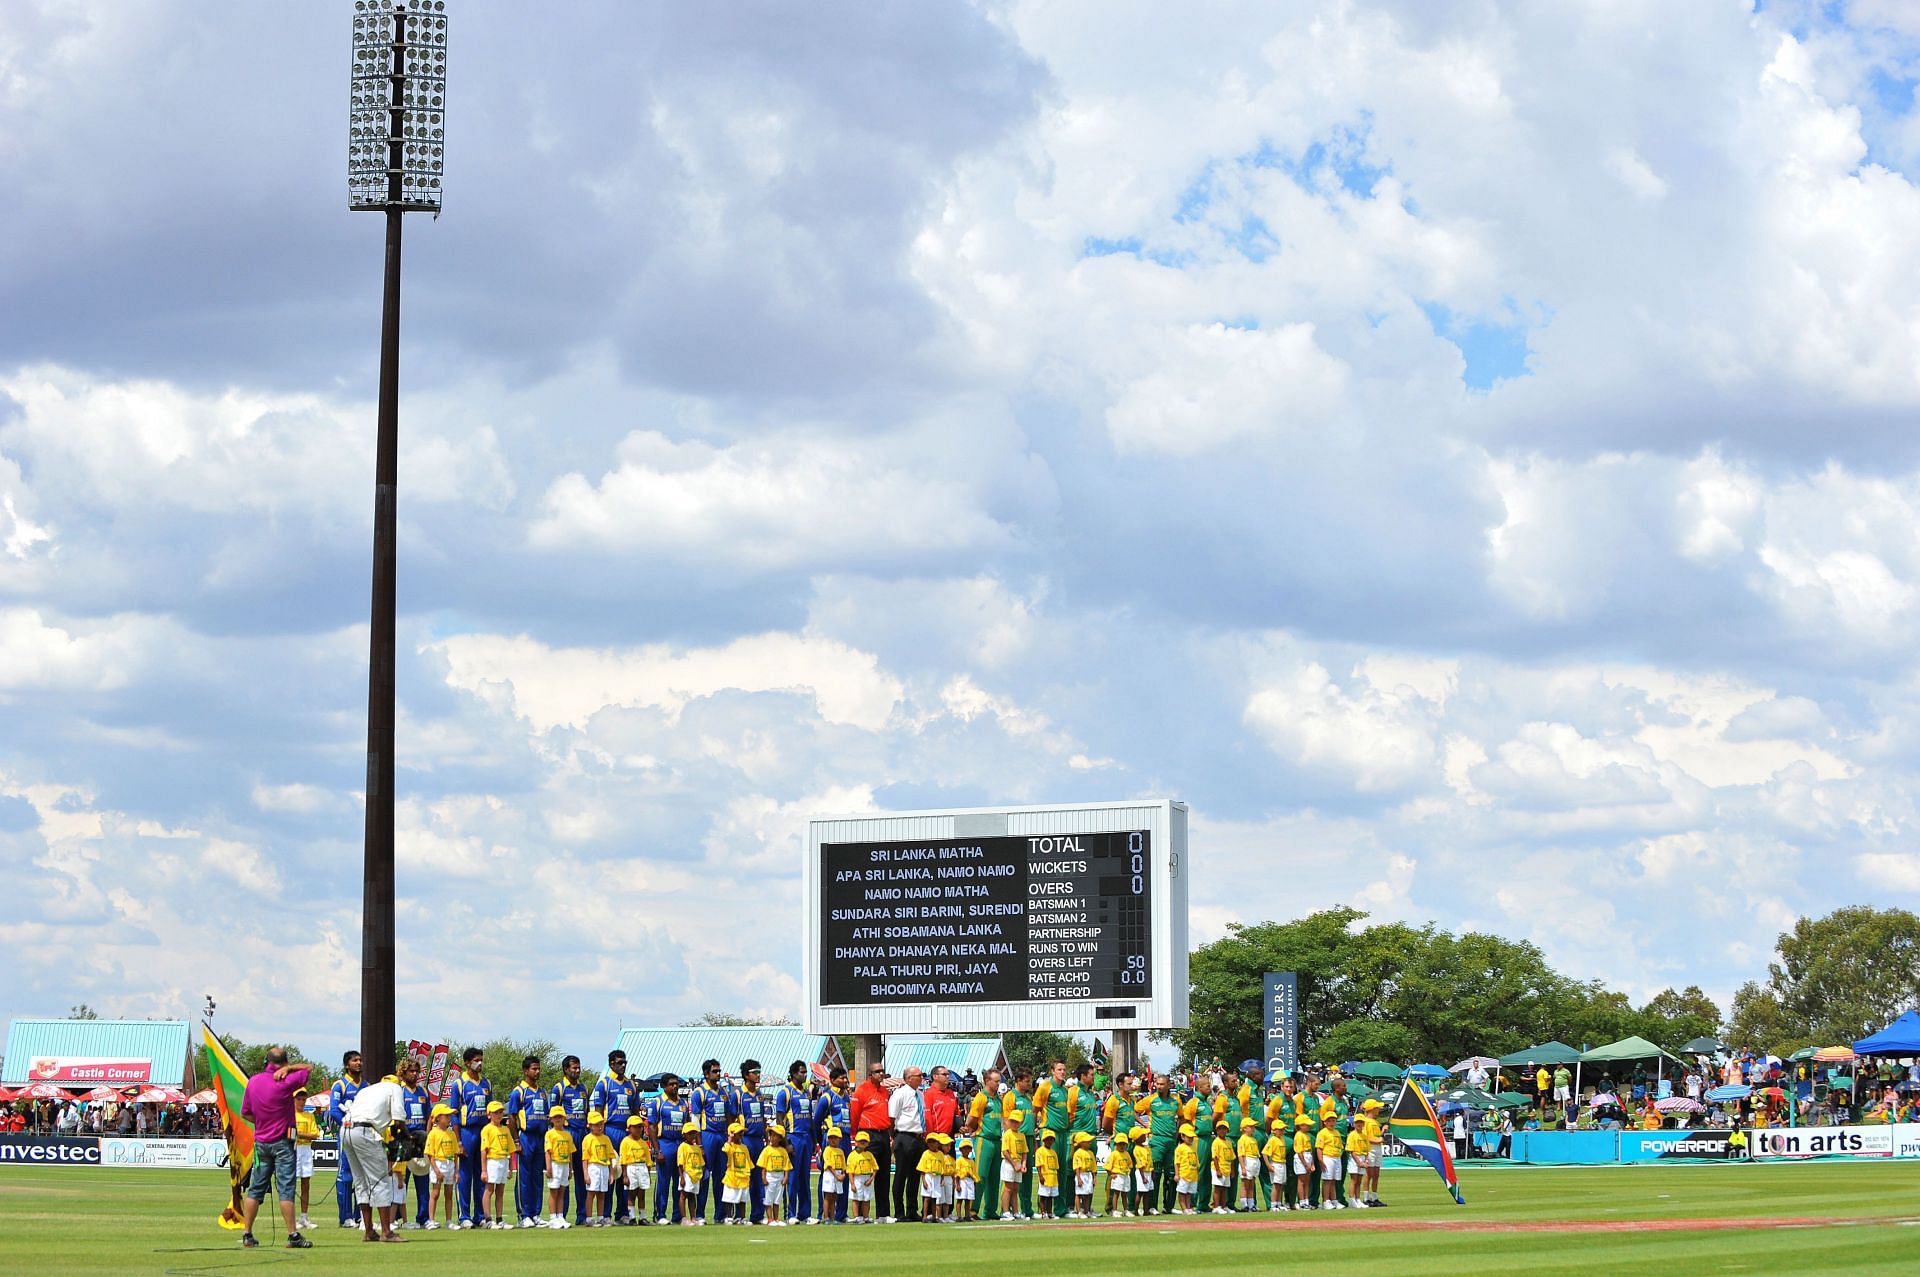 The Diamond Oval in Kimberley will host this second semi-final